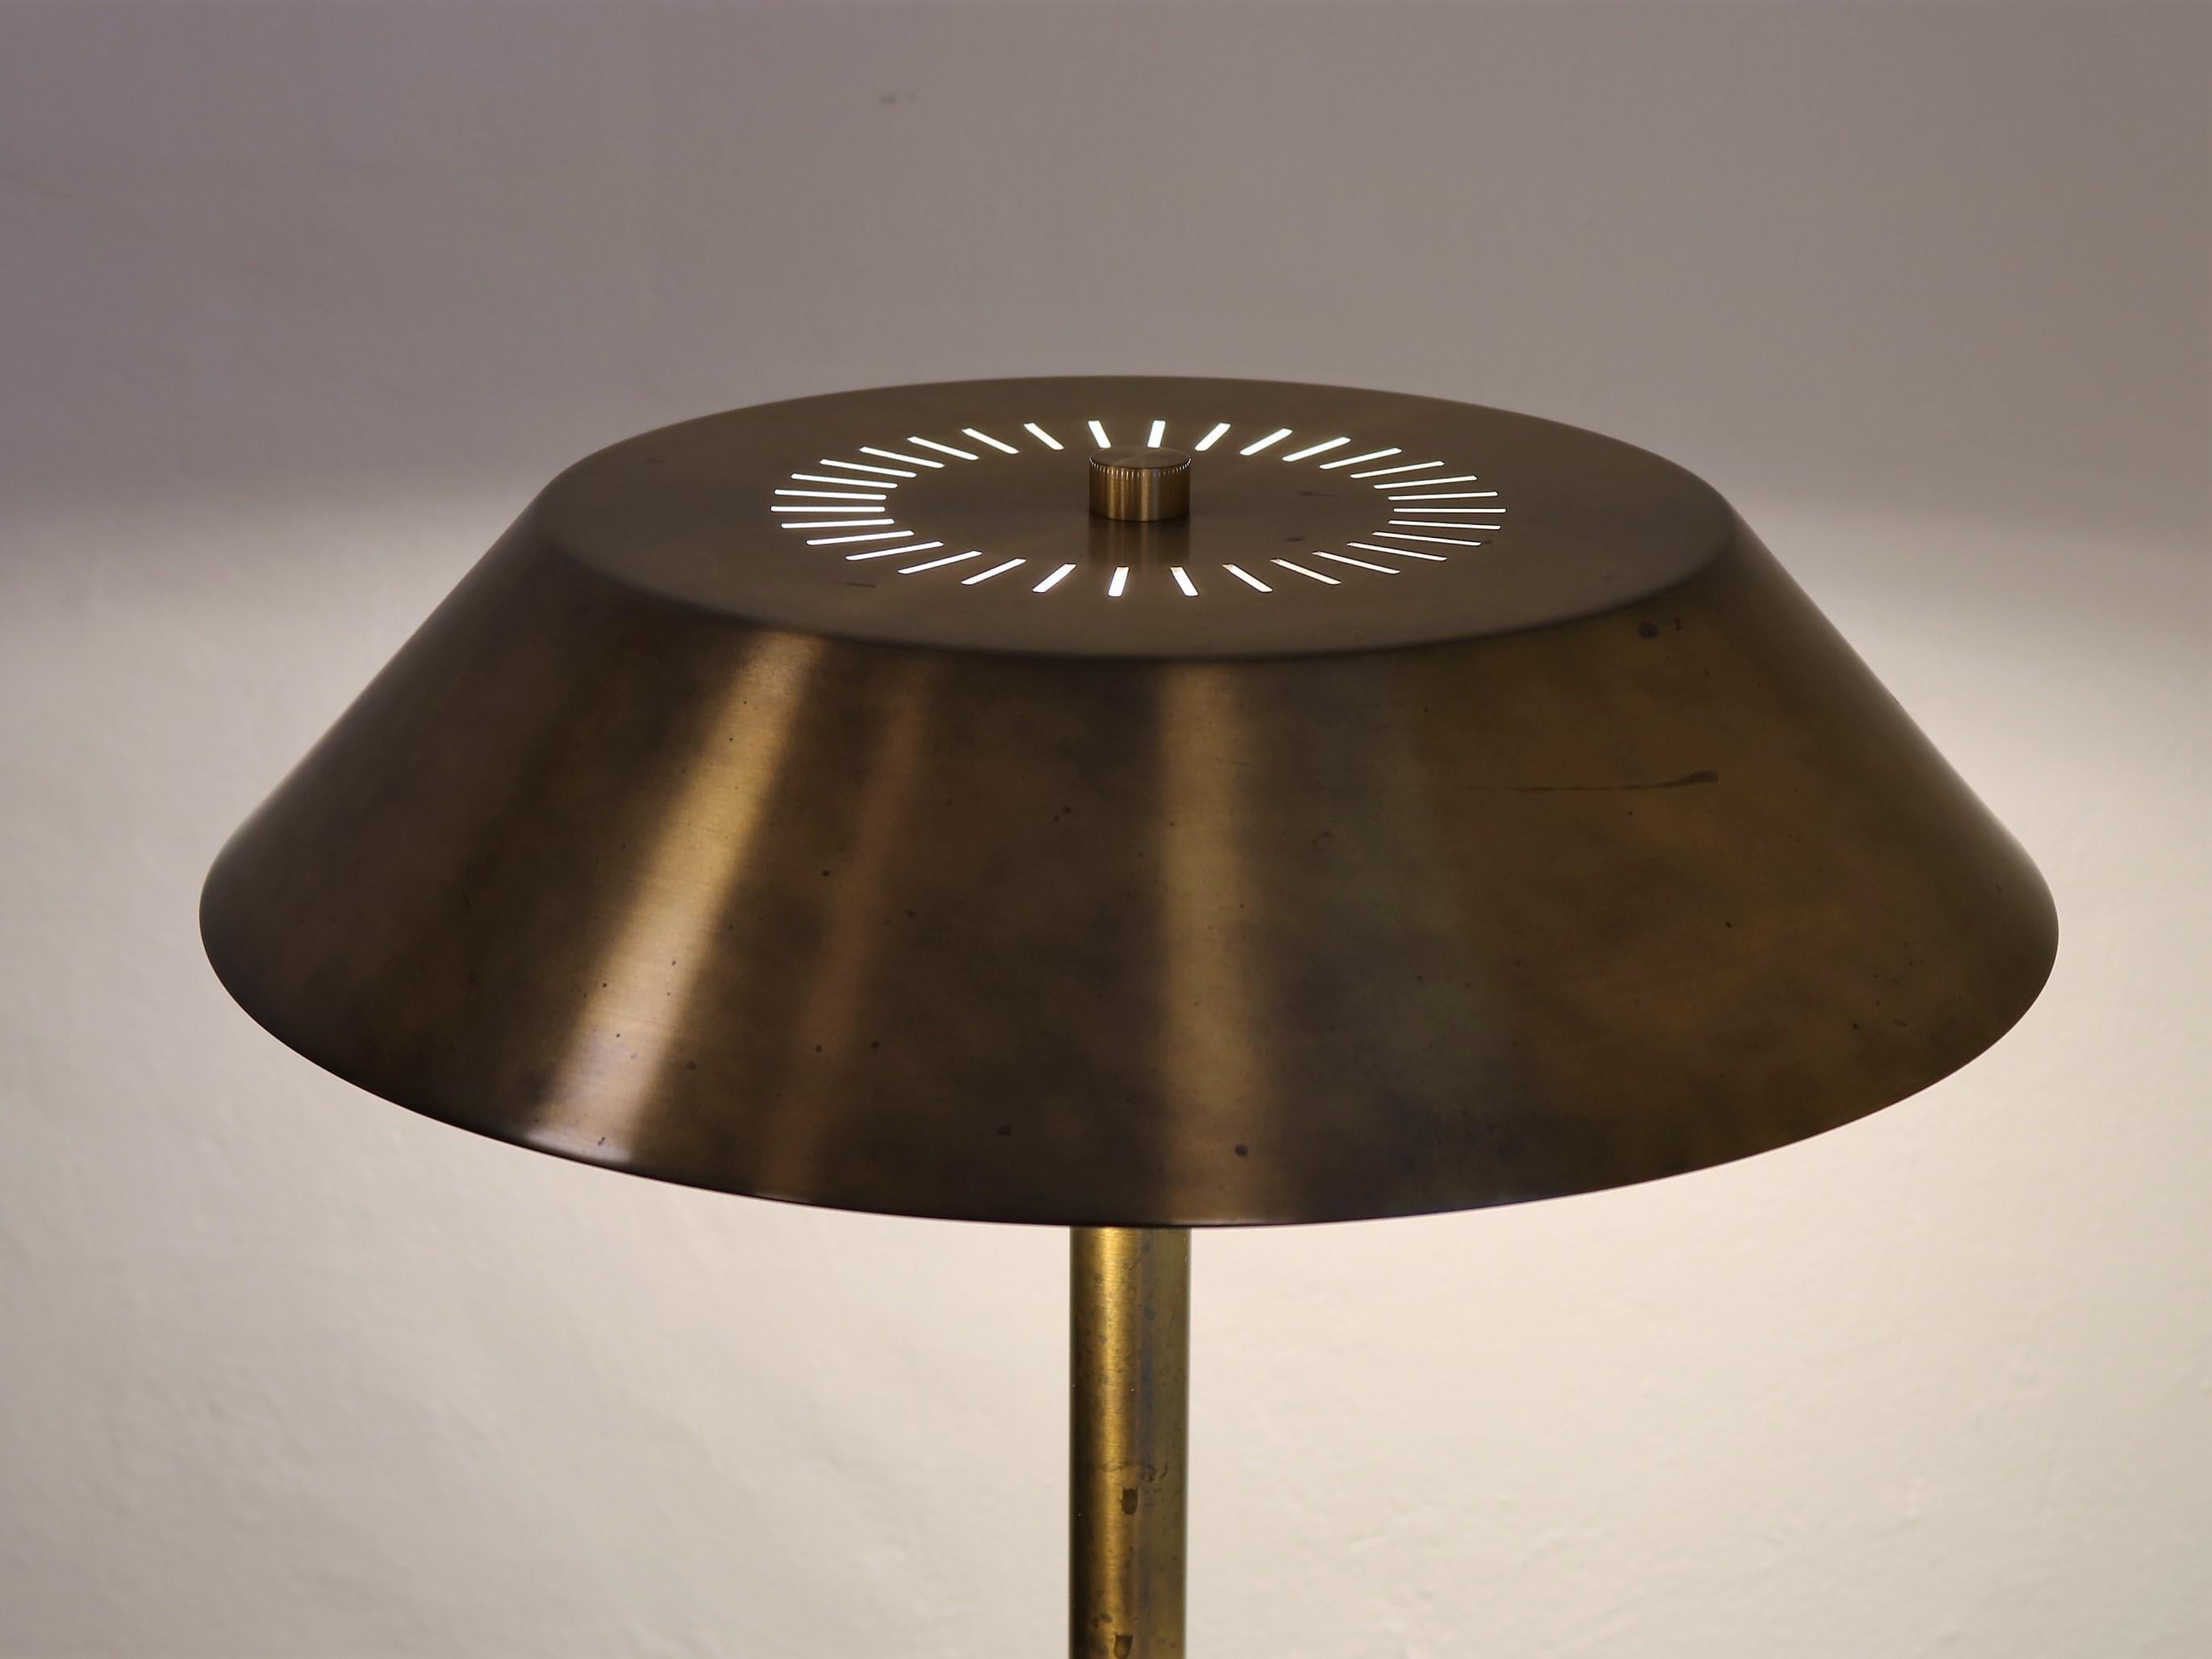 Design by Danish designer Jo Hammerborg in 1966 and manufactured by Fog & Mørup. Table lamp in brass and teak. The lamp has 2-light sources. All original parts.